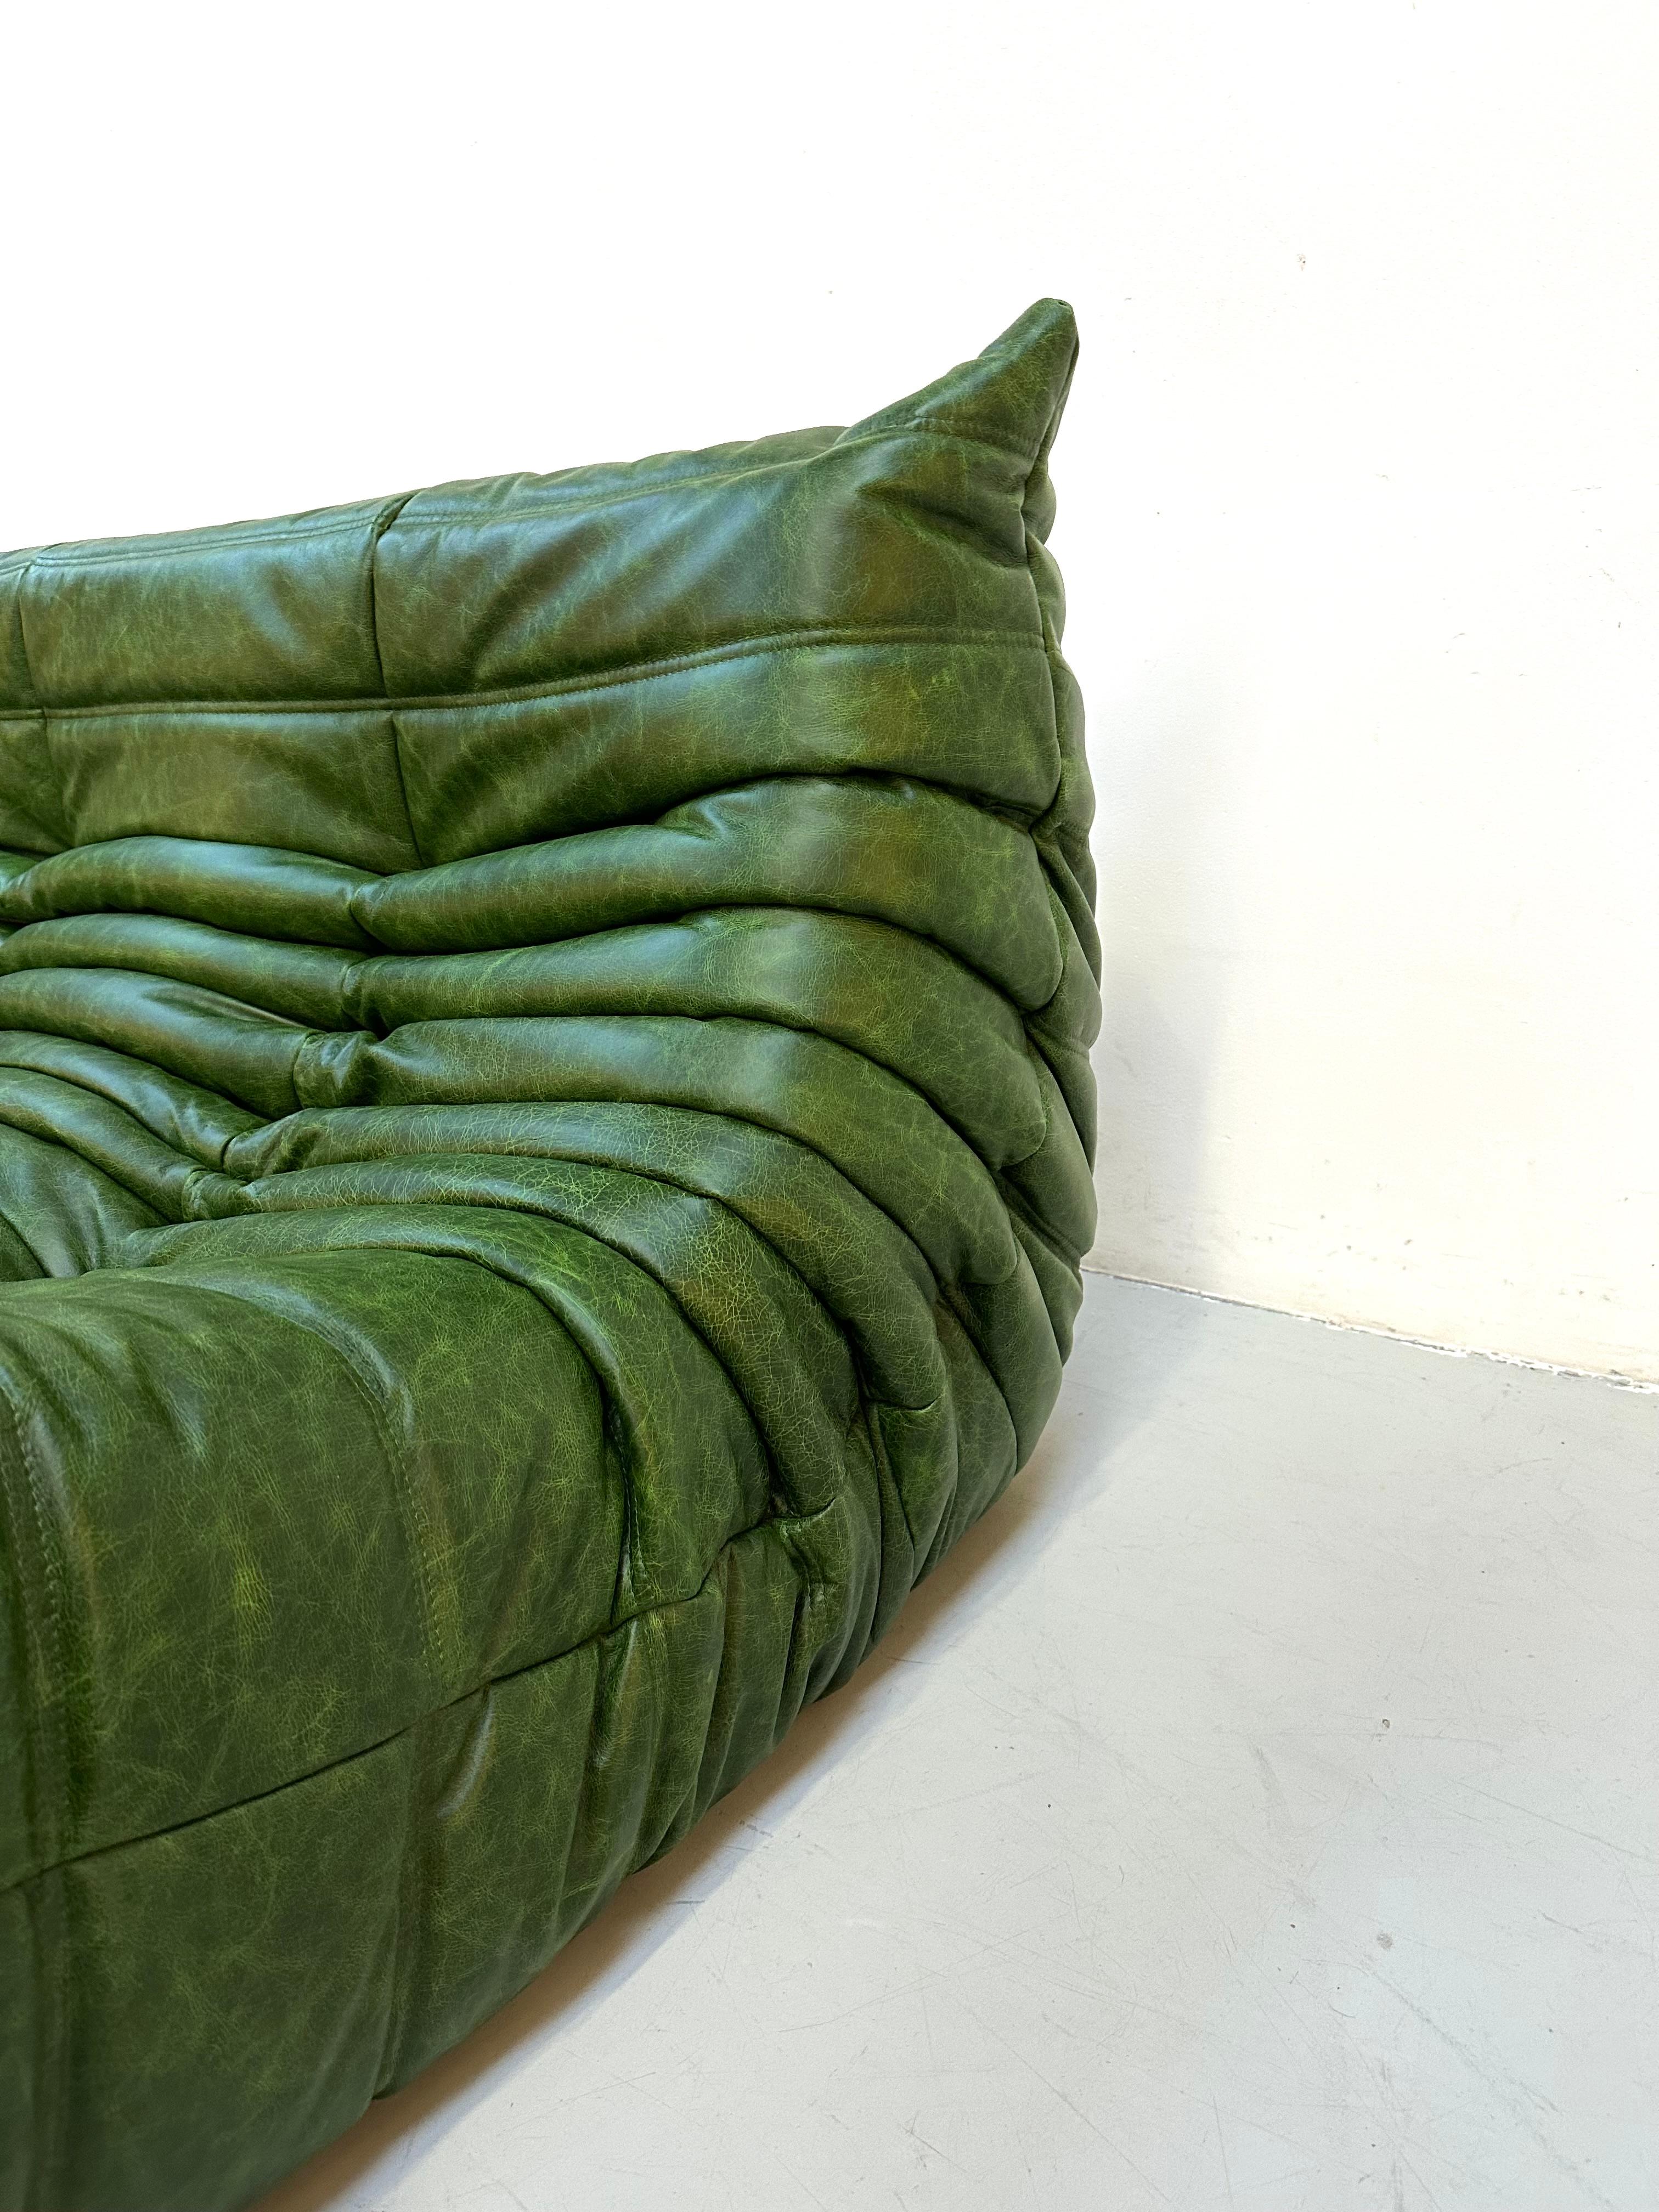 French Vintage Togo Sofa in Green  Leather by Michel Ducaroy for Ligne Roset. 2